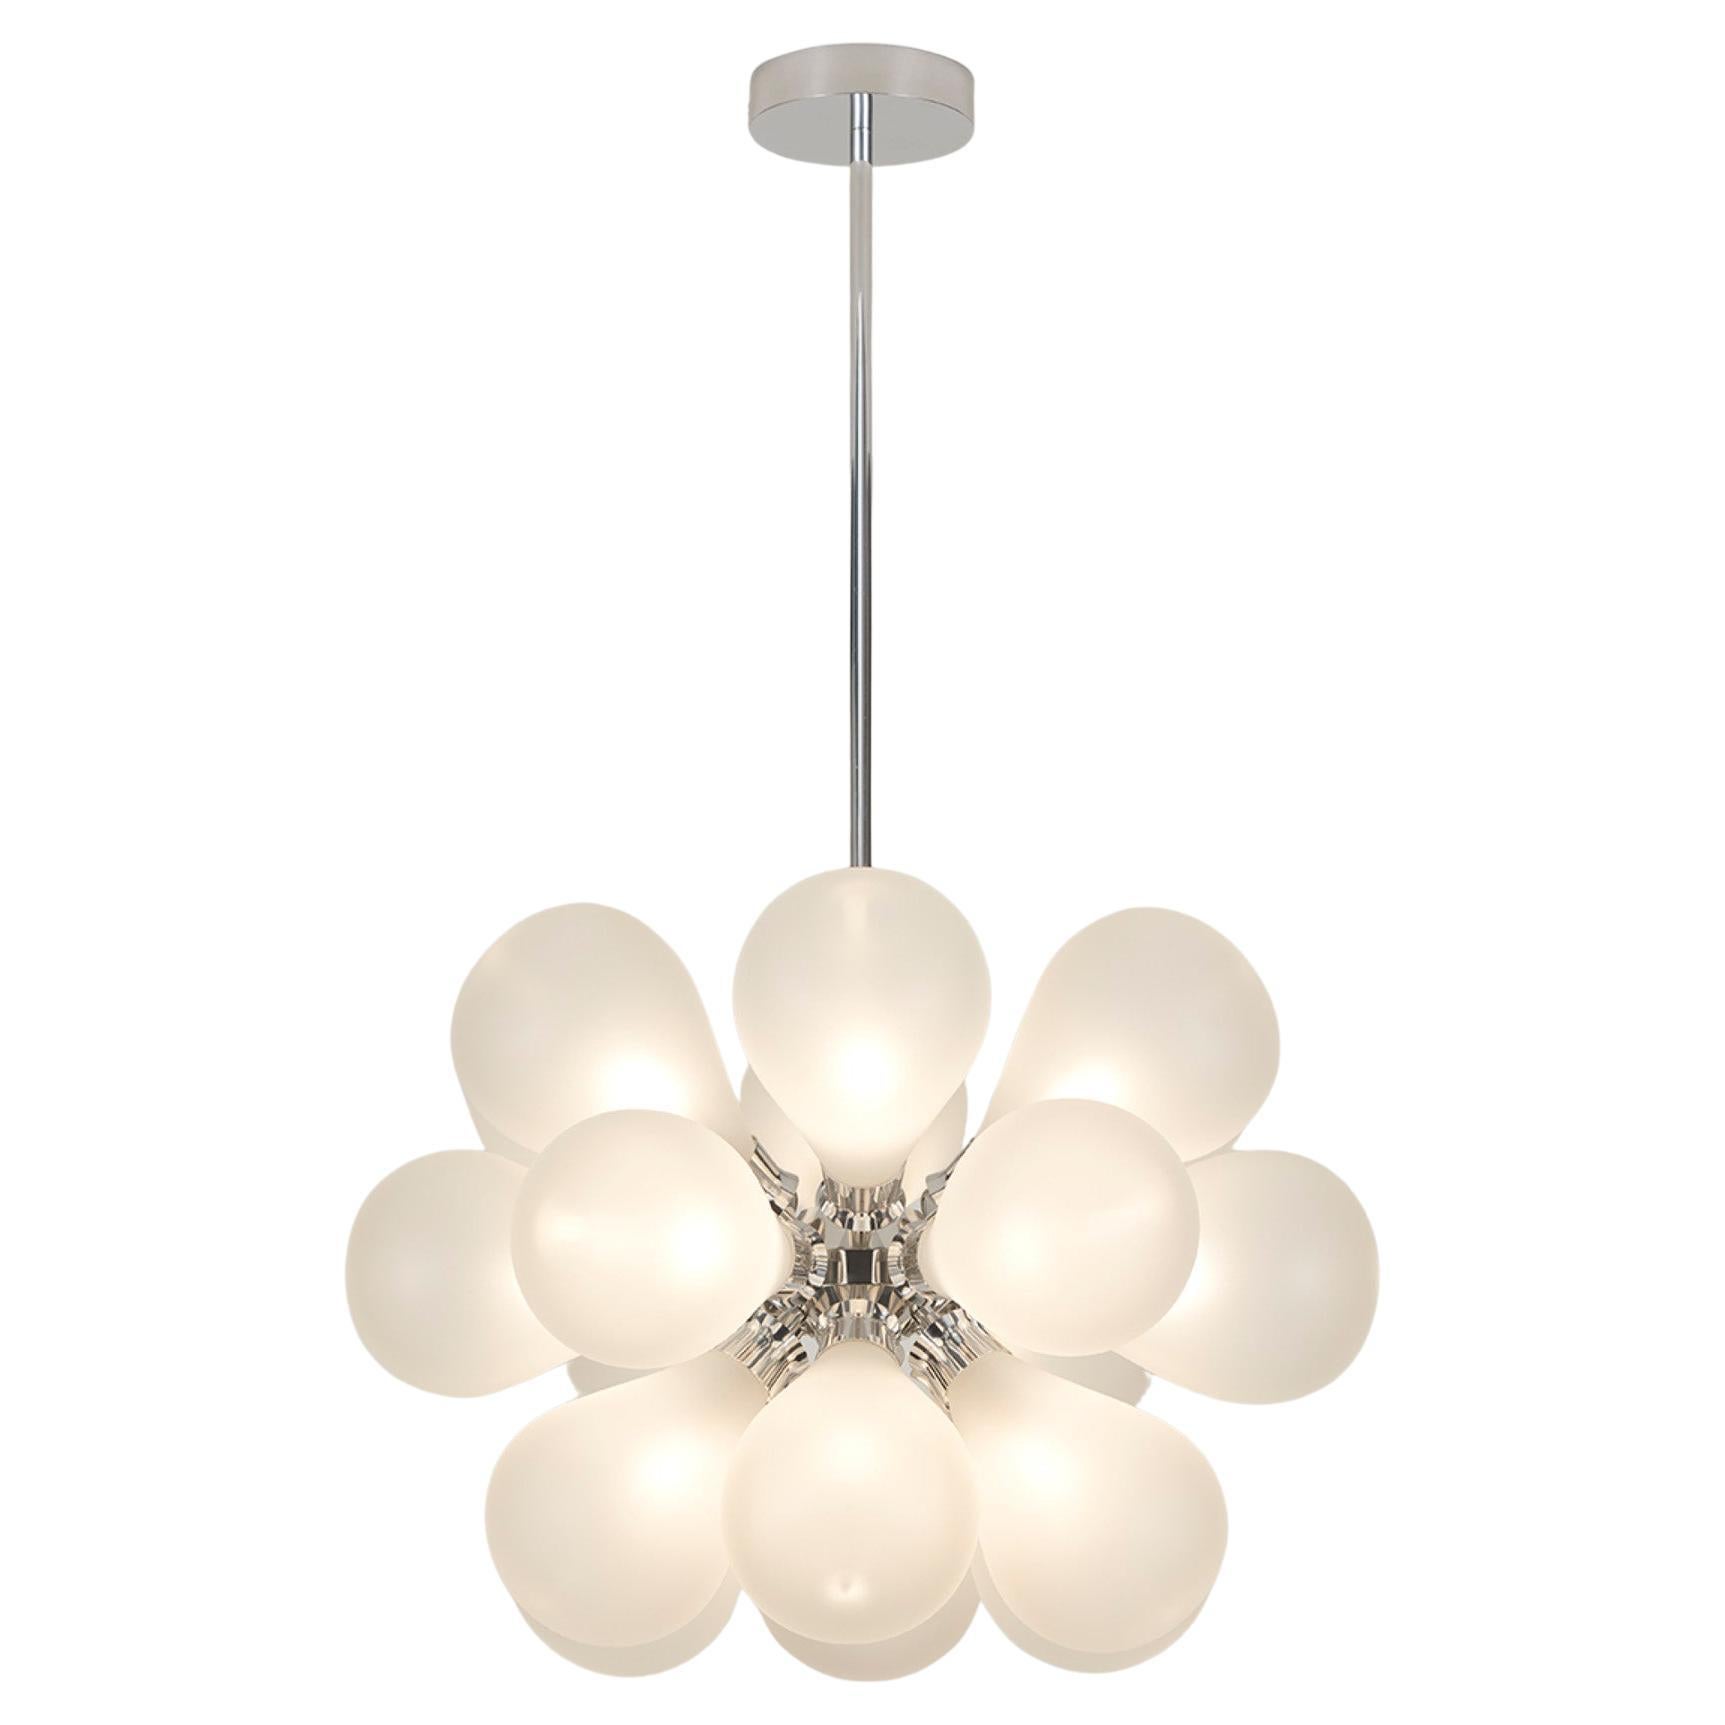 Cintola Maxi Pendant in Polished Aluminium with 18 Handblown Frosted Globes For Sale